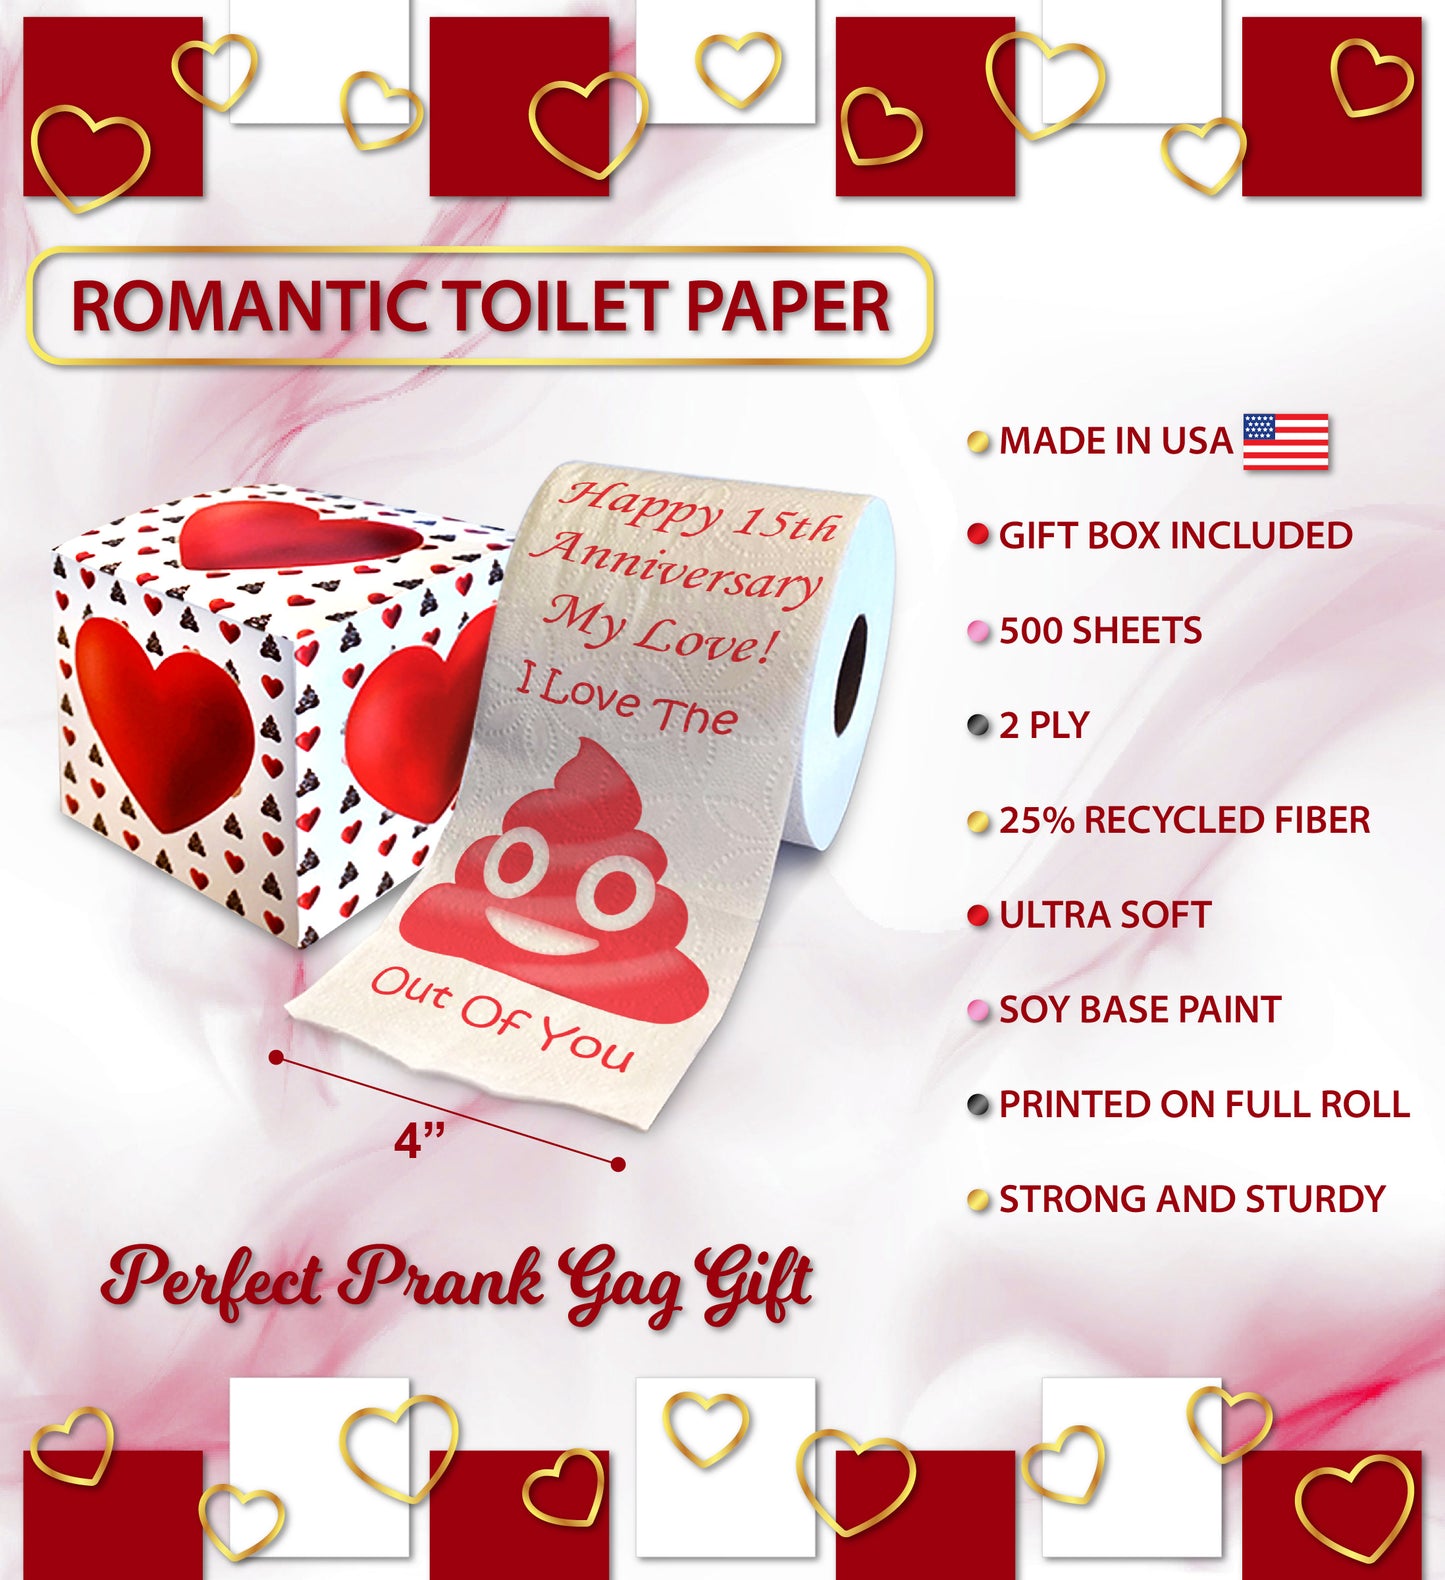 Printed TP Happy Fifteenth Anniversary Printed Toilet Paper Prank – 500 Sheets